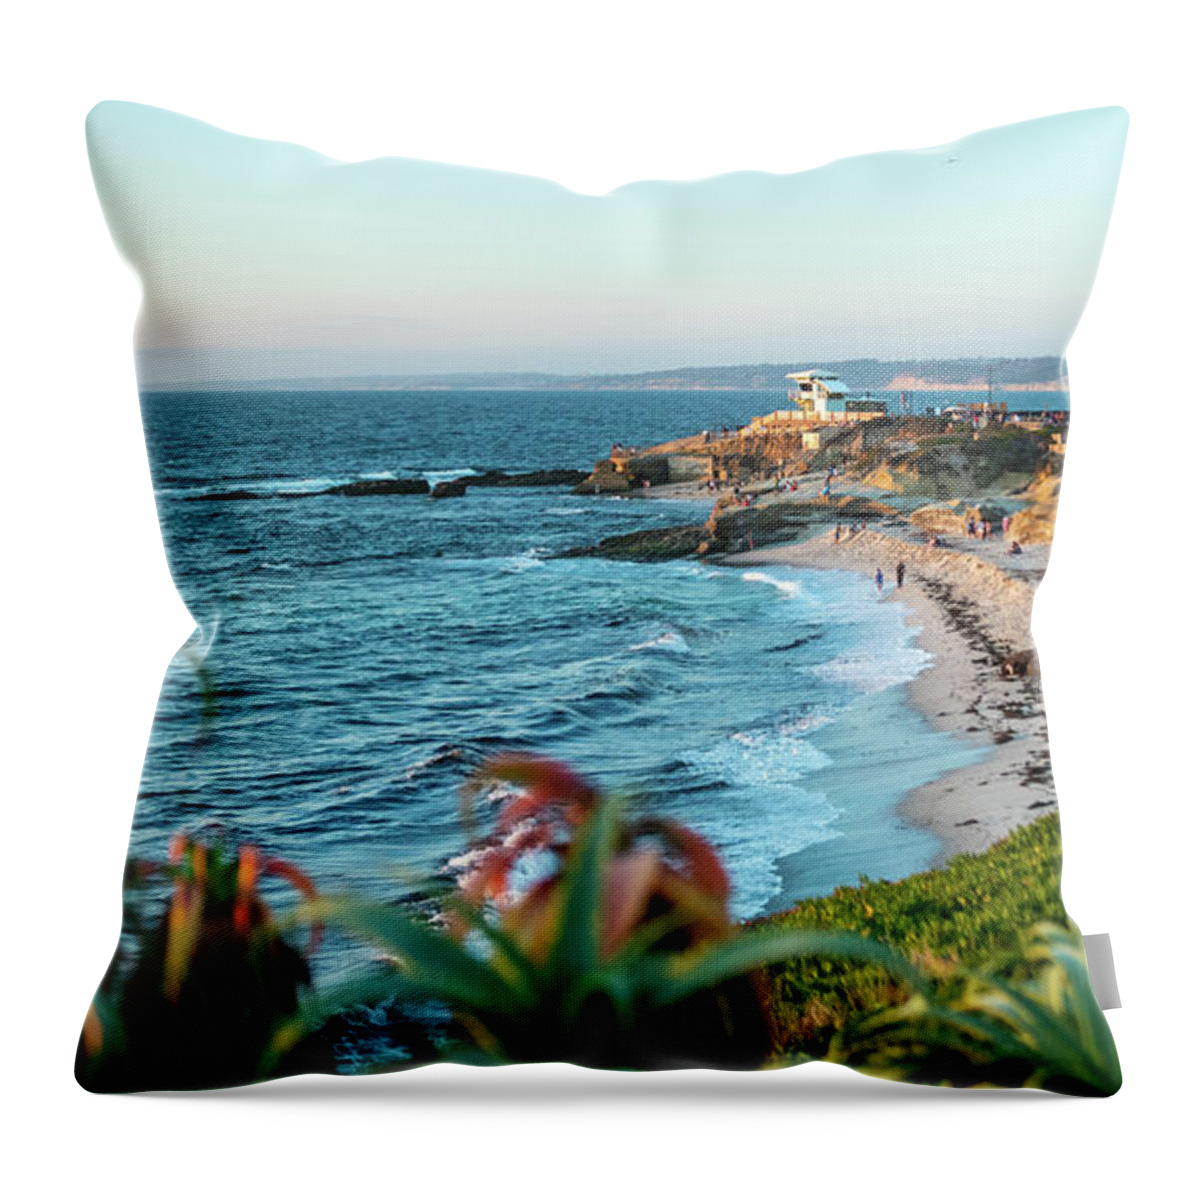 Landscape Throw Pillow featuring the photograph La Jolla Life Guard Station by Local Snaps Photography